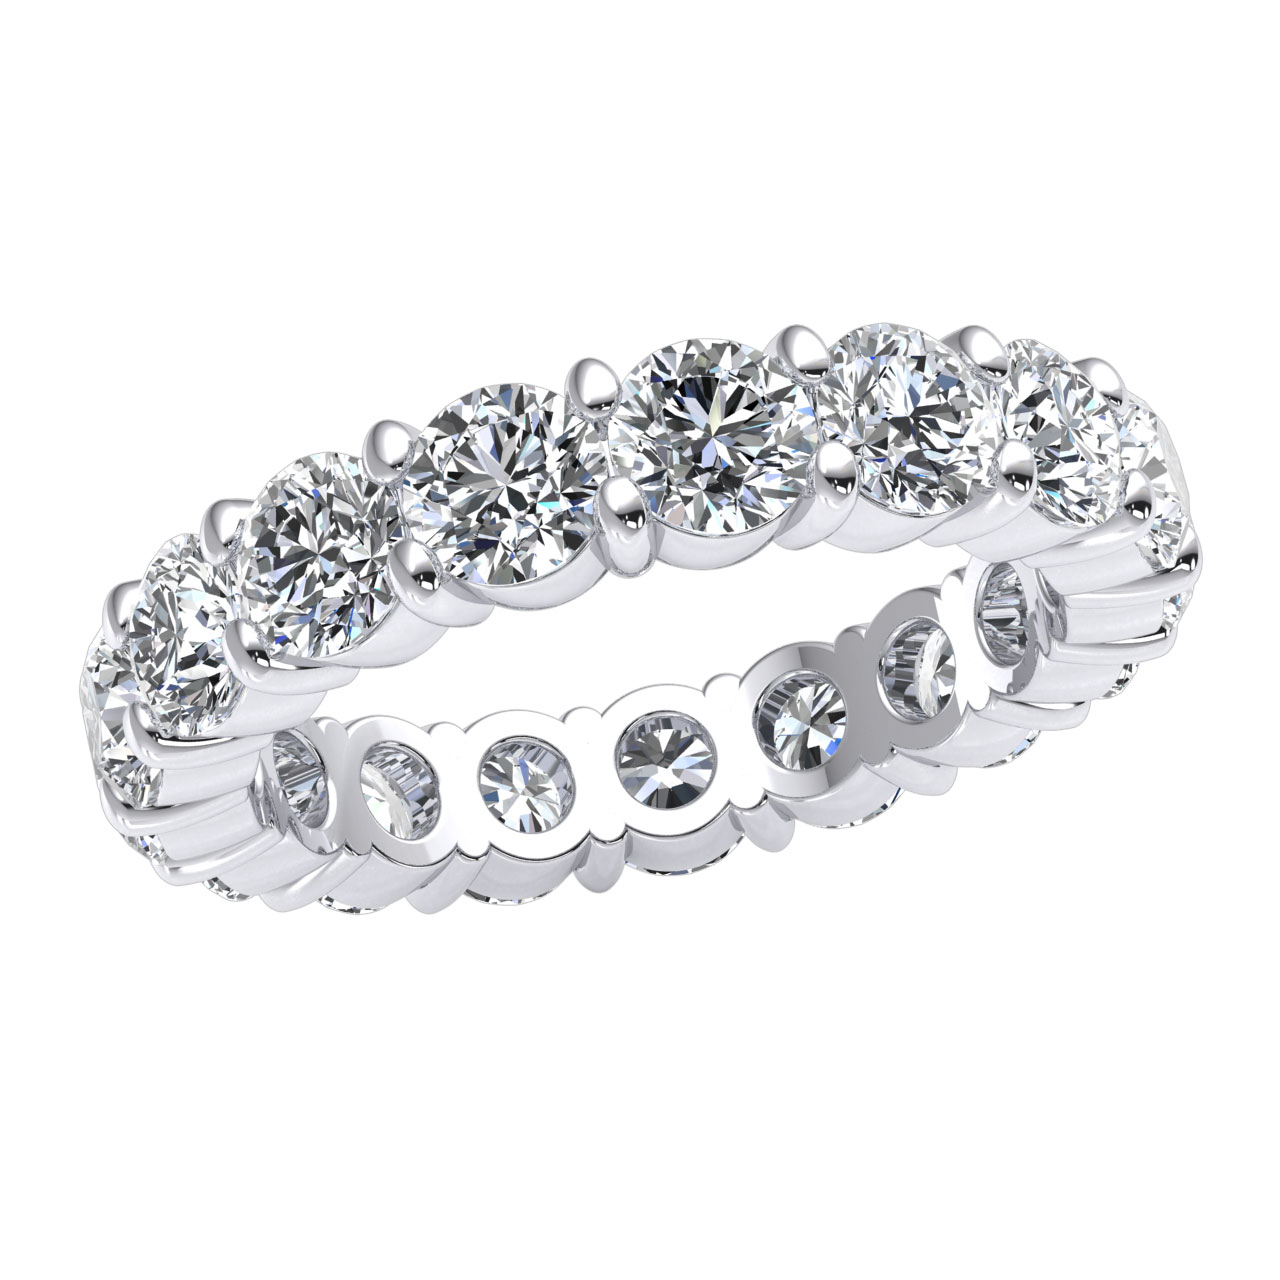 Pre-owned Jewelwesell 4.5ct Classic Shared Prong Eternity Wedding Band Ring Round Diamond 14k Gold